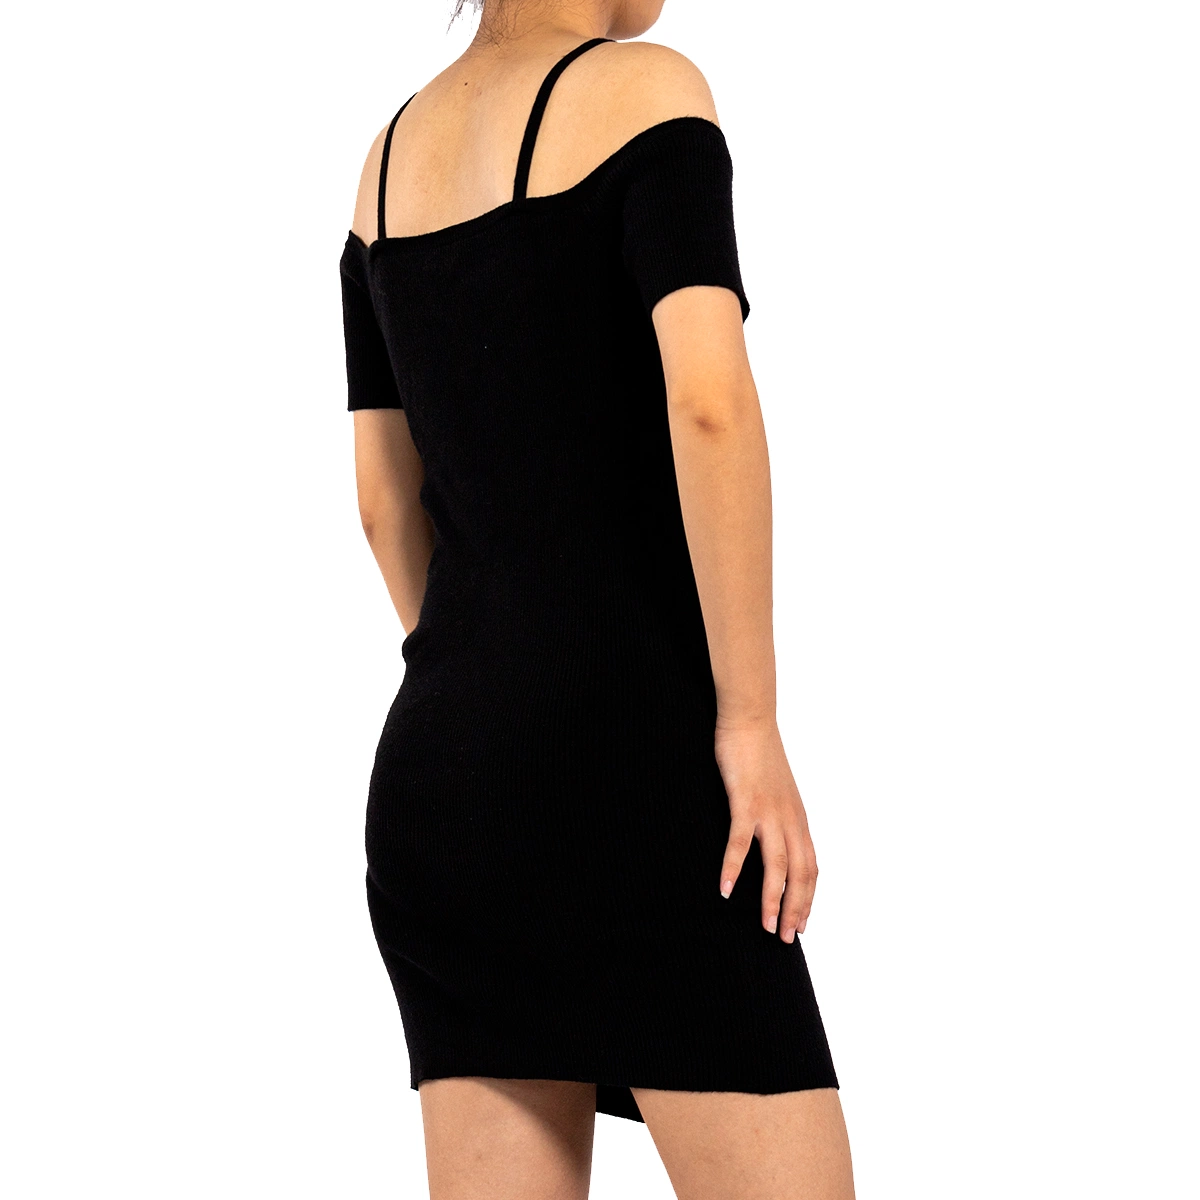 Women Summer Black French Hollow out Strapless Halter Sexy Dresses